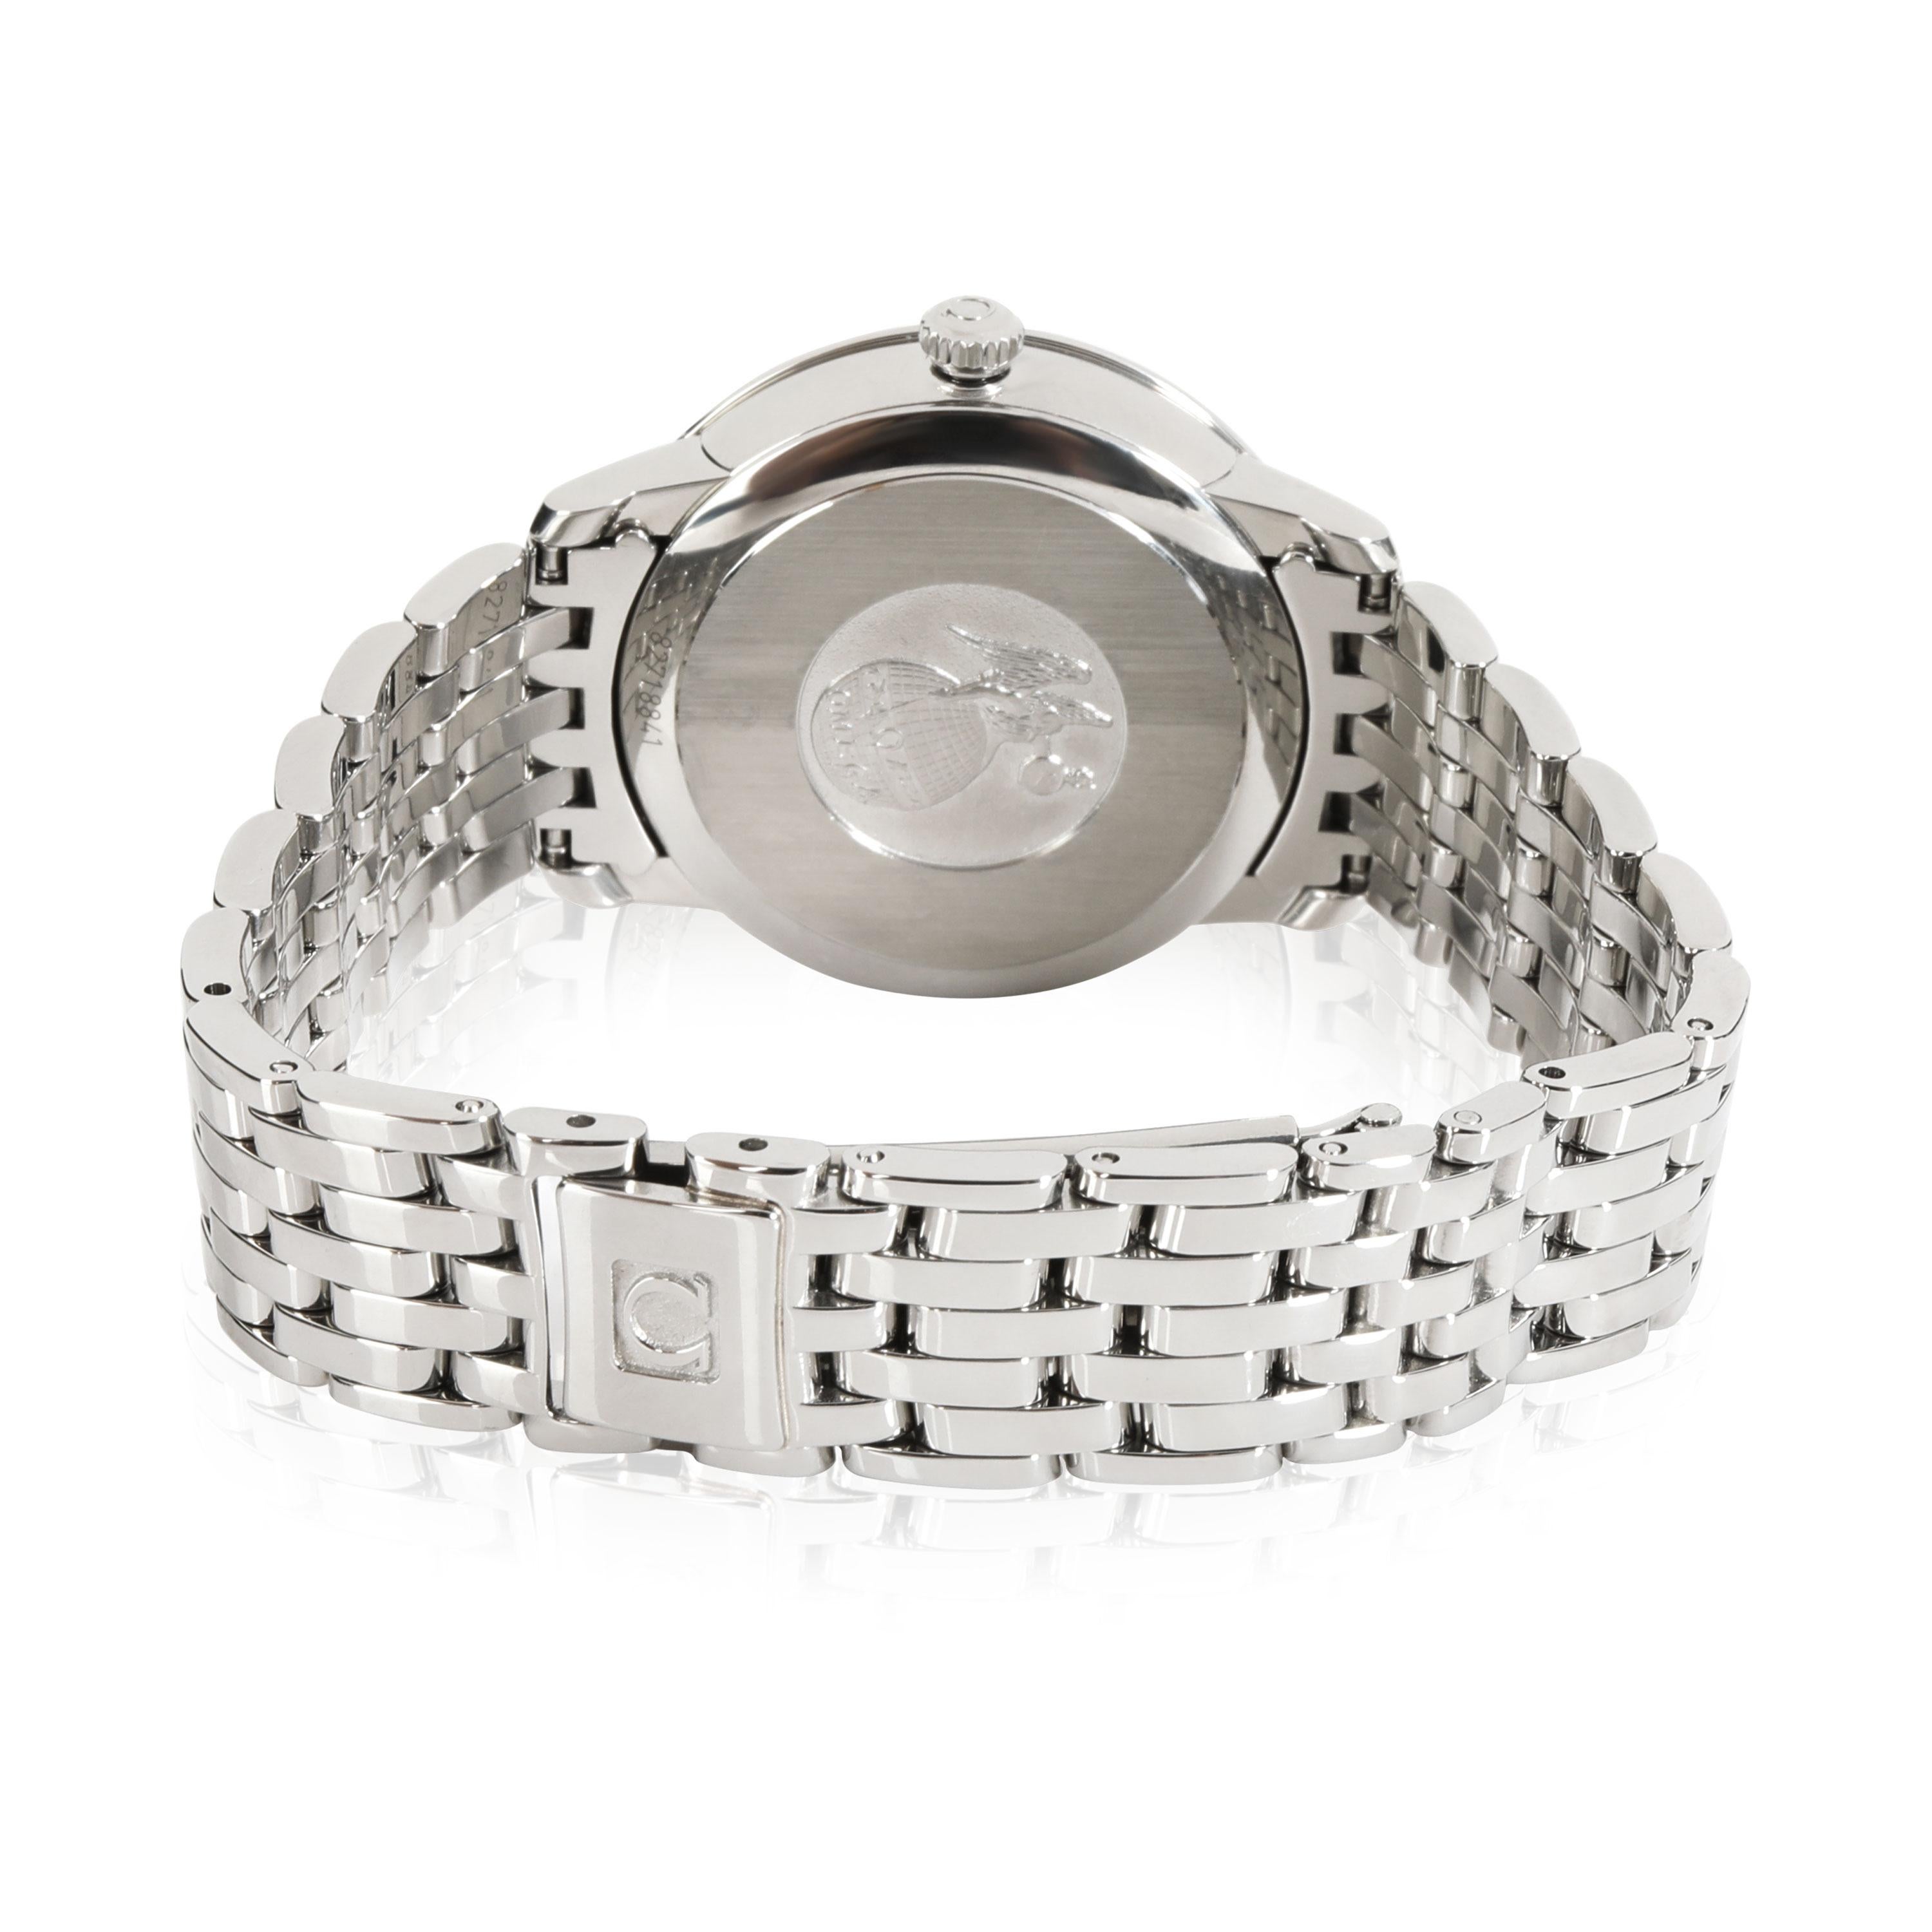 
Omega DeVille 424.10.33.20.52.001 Women's Watch in Stainless Steel

SKU: 111759

PRIMARY DETAILS
Brand:  Omega
Model: DeVille
Country of Origin: Switzerland
Movement Type:  
Year Manufactured: 
Year of Manufacture: 2010-2019
Condition: Retail price